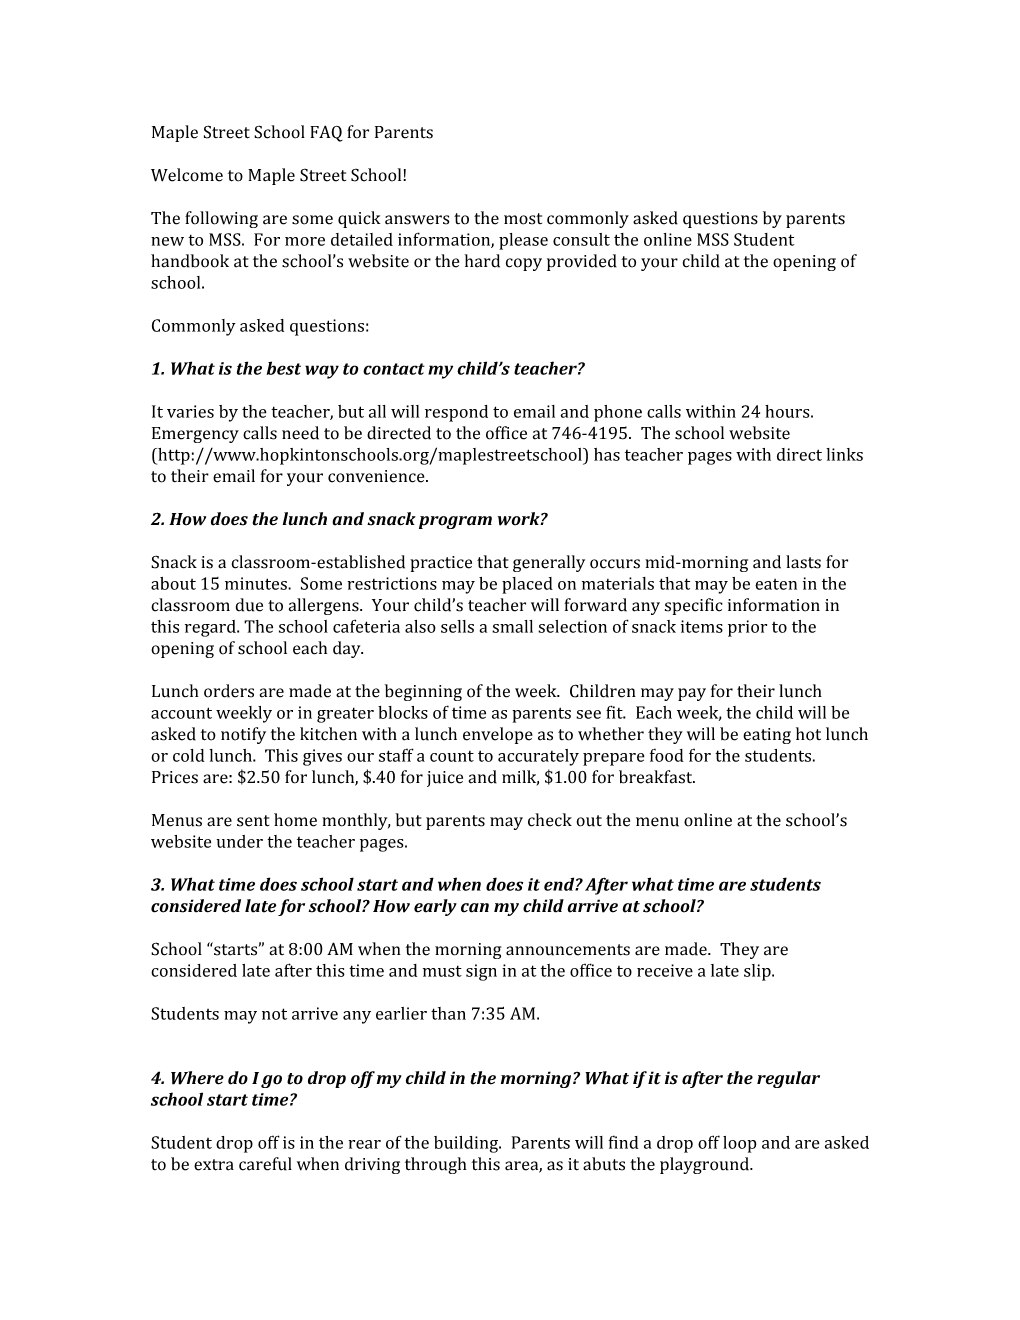 Maple Street School FAQ for Parents Welcome to Maple Street School! the Following Are Some